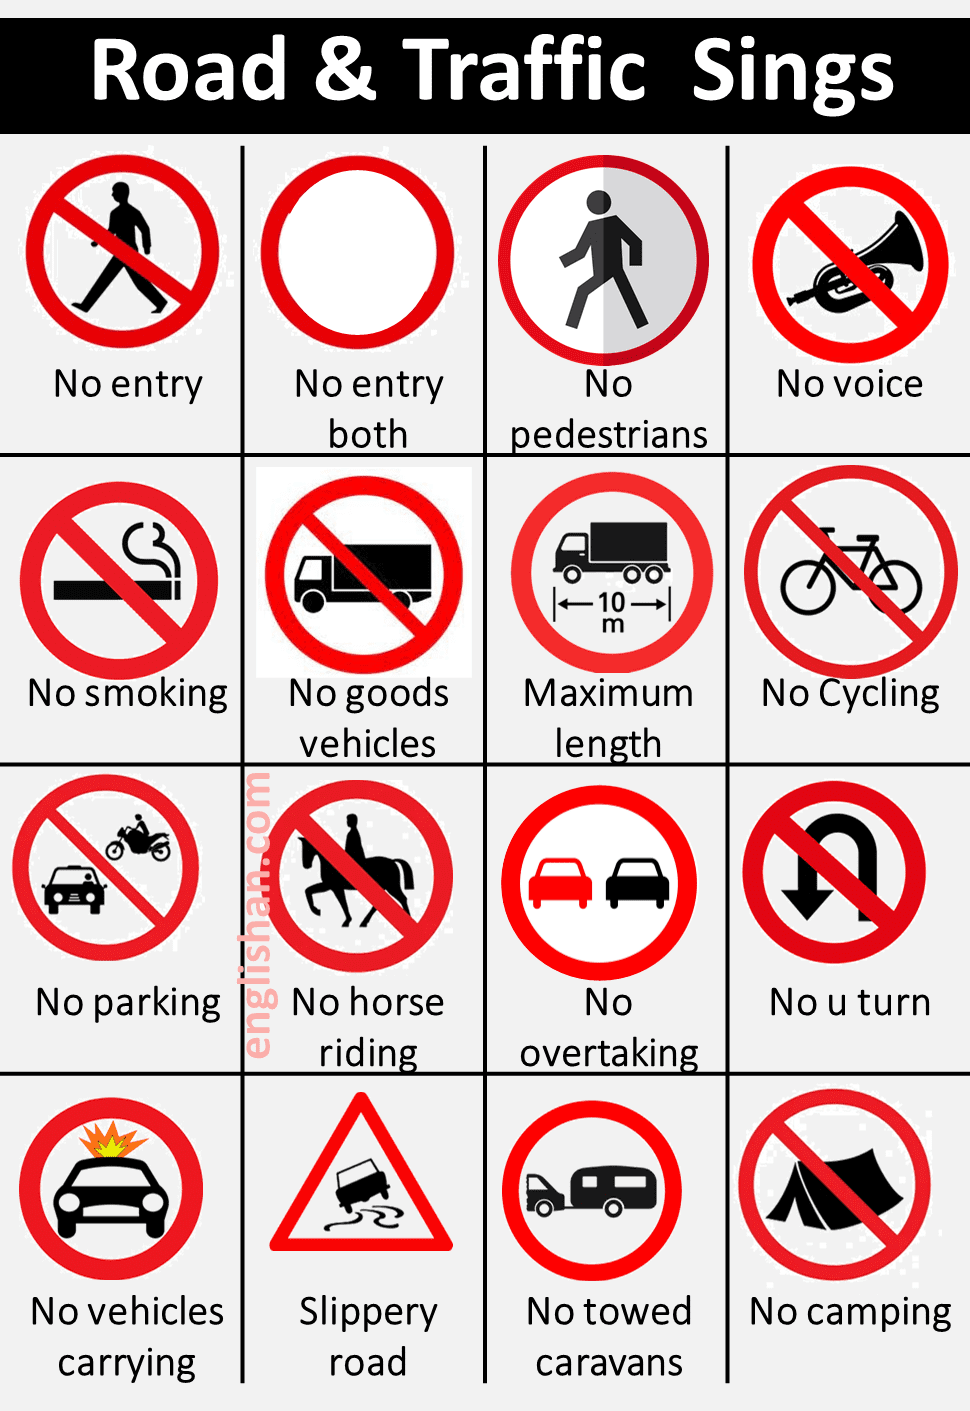 20 Road Signs and Their Meaning